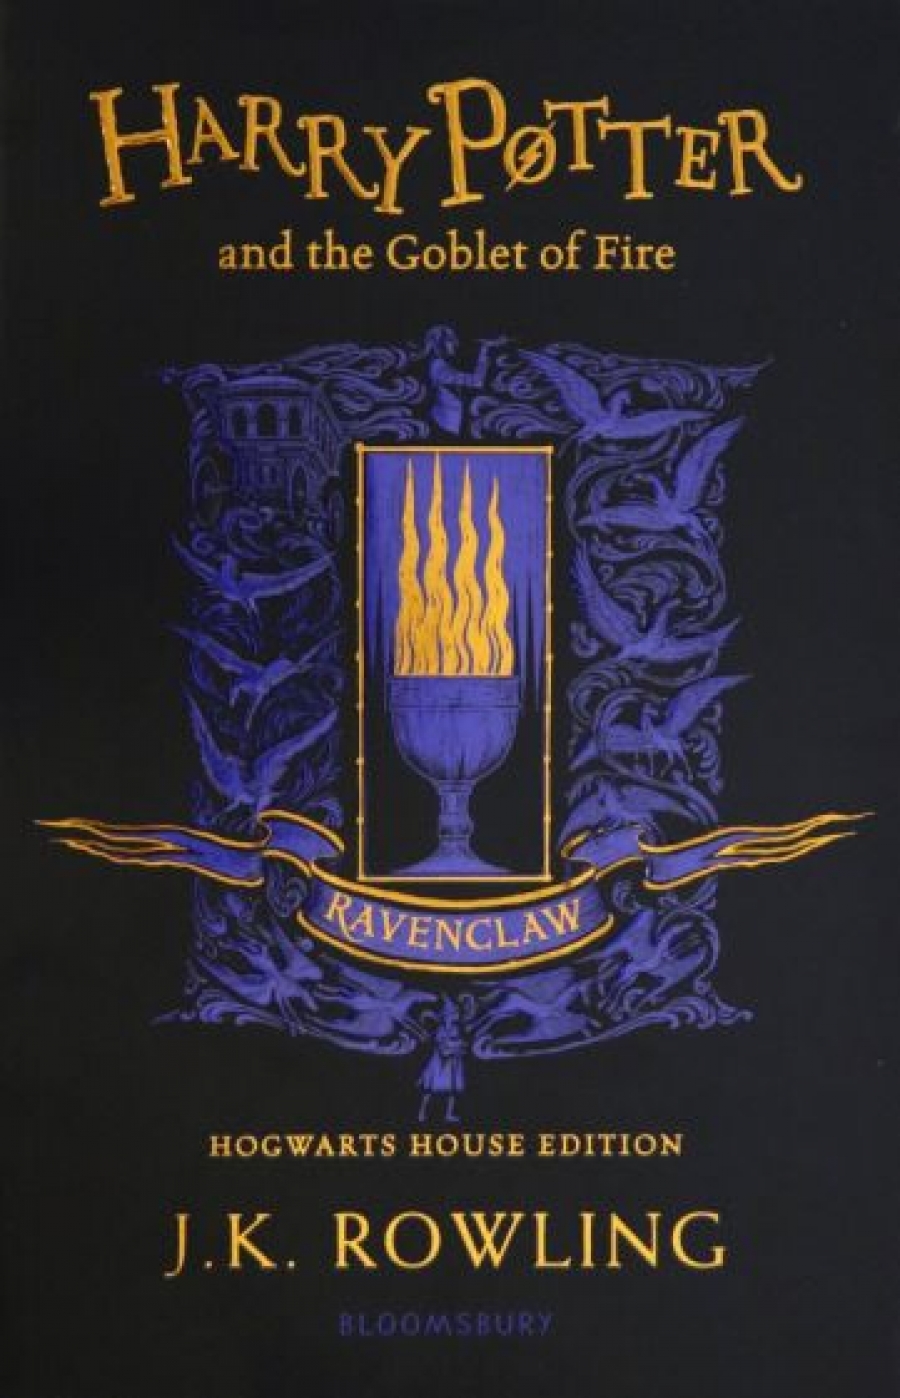 Rowling J.K. Harry Potter and the Goblet of Fire - Ravenclaw Edition 